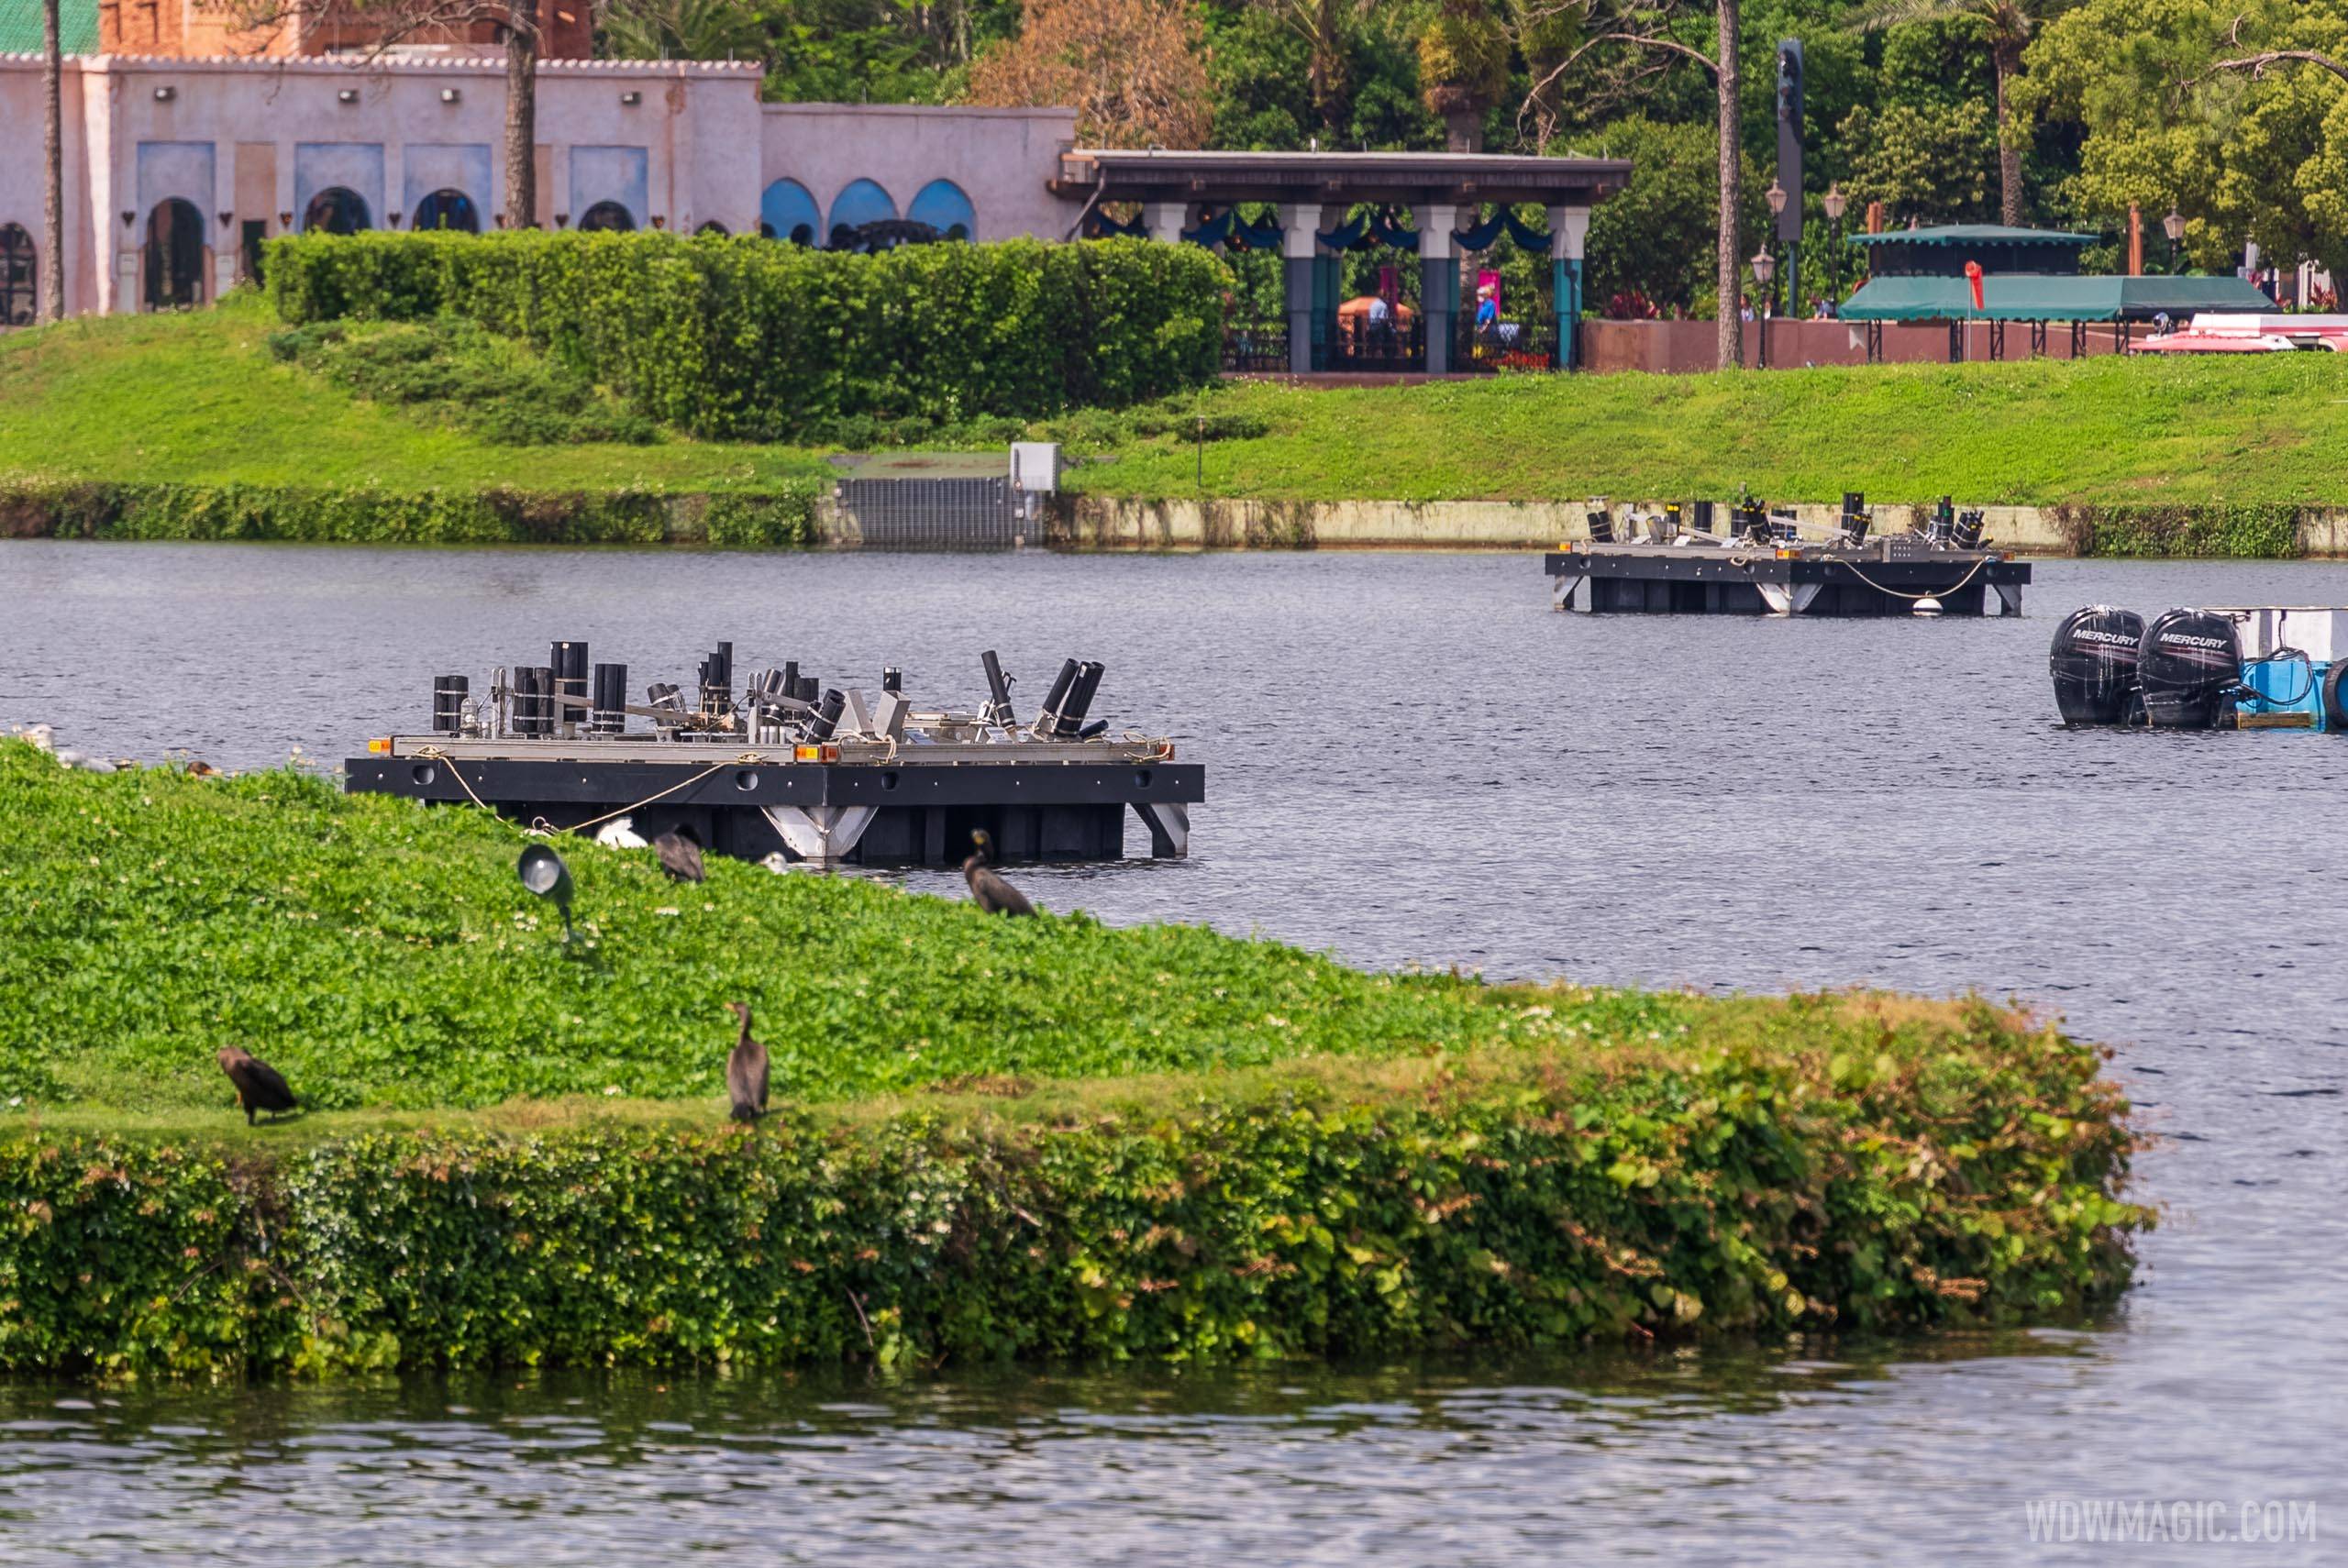 Firework platforms in place in World Showcase Lagoon as Harmonious testing continues